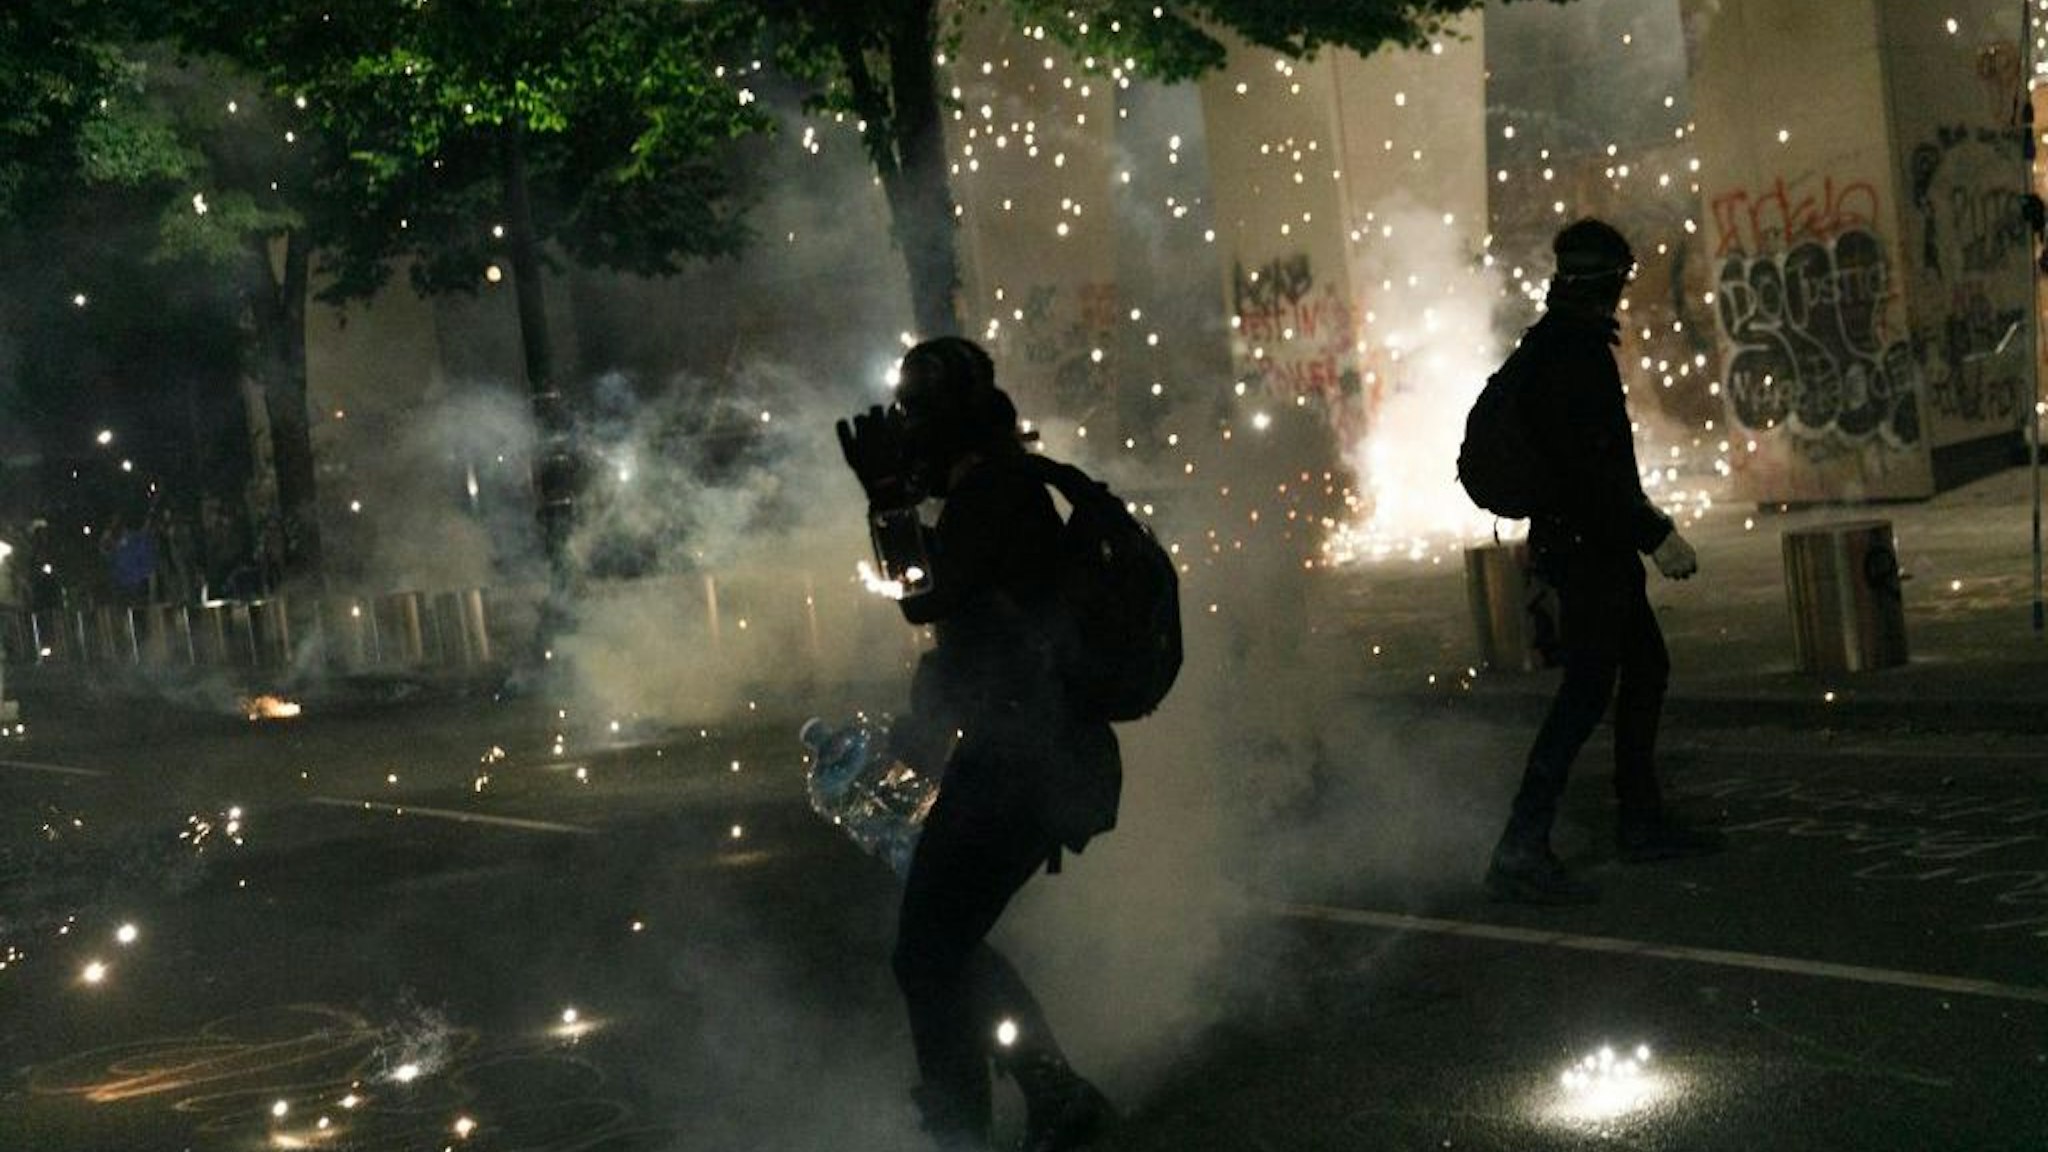 Tear gas and fireworks mix as Black Lives Matter supporters demonstrate in Portland, Oregon on July 4, 2020 for the thirty-eighth day in a row at Portland's Justice Center and throughout Portland, with a riot declared about 12.20 am on July 5. CS tear gas and less-lethal weapons were used, and multiple arrests were made. (Photo by John Rudoff/Anadolu Agency via Getty Images)